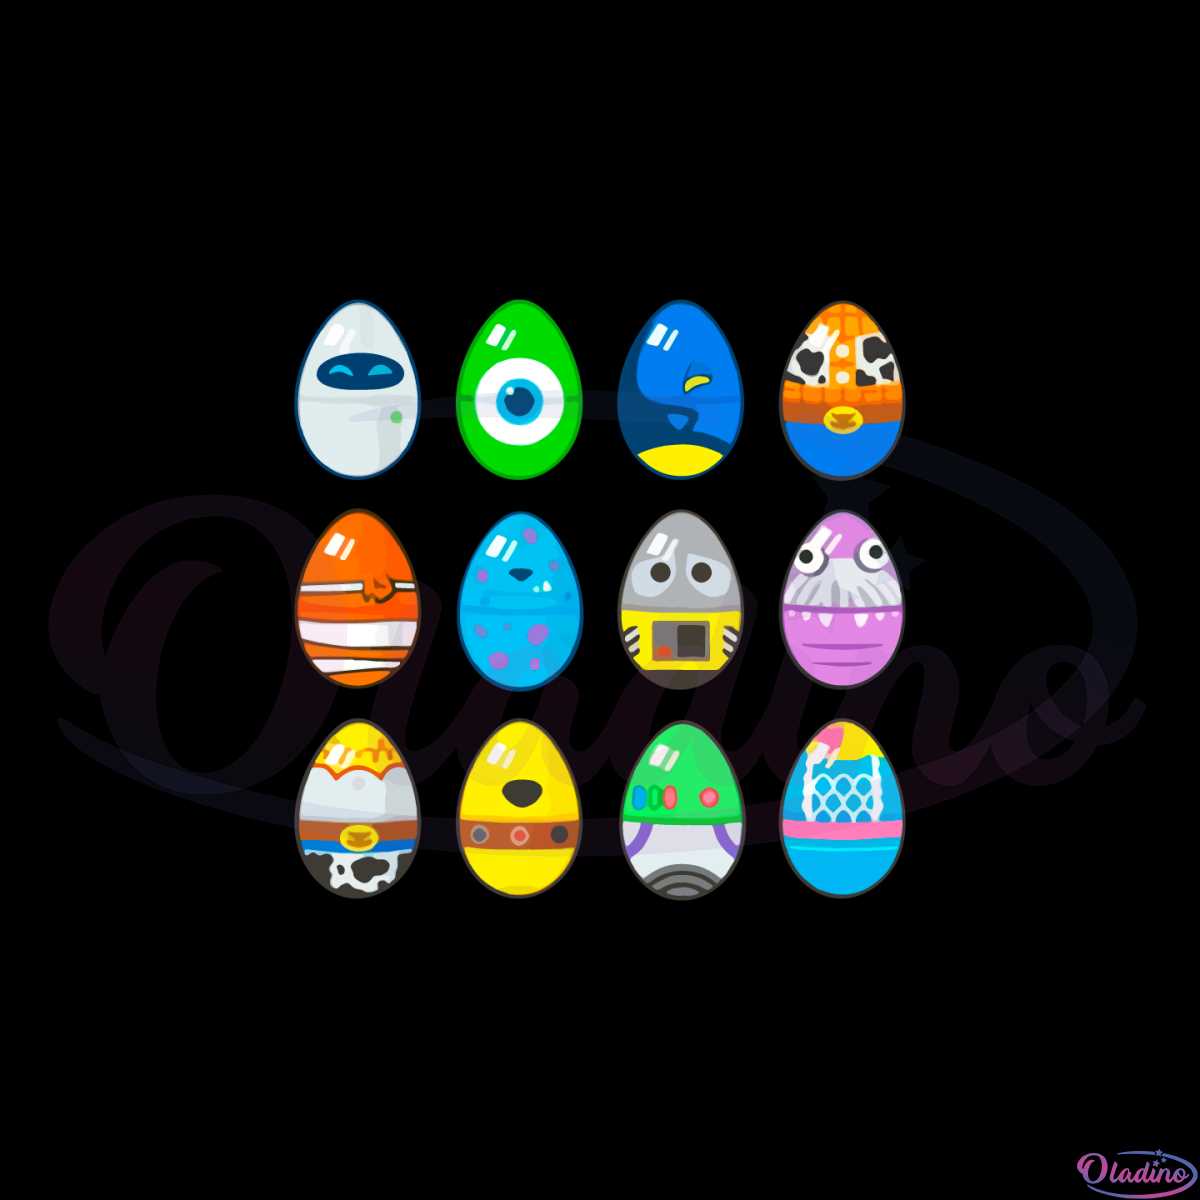 pixar-classic-characters-easter-eggs-best-svg-cutting-digital-files